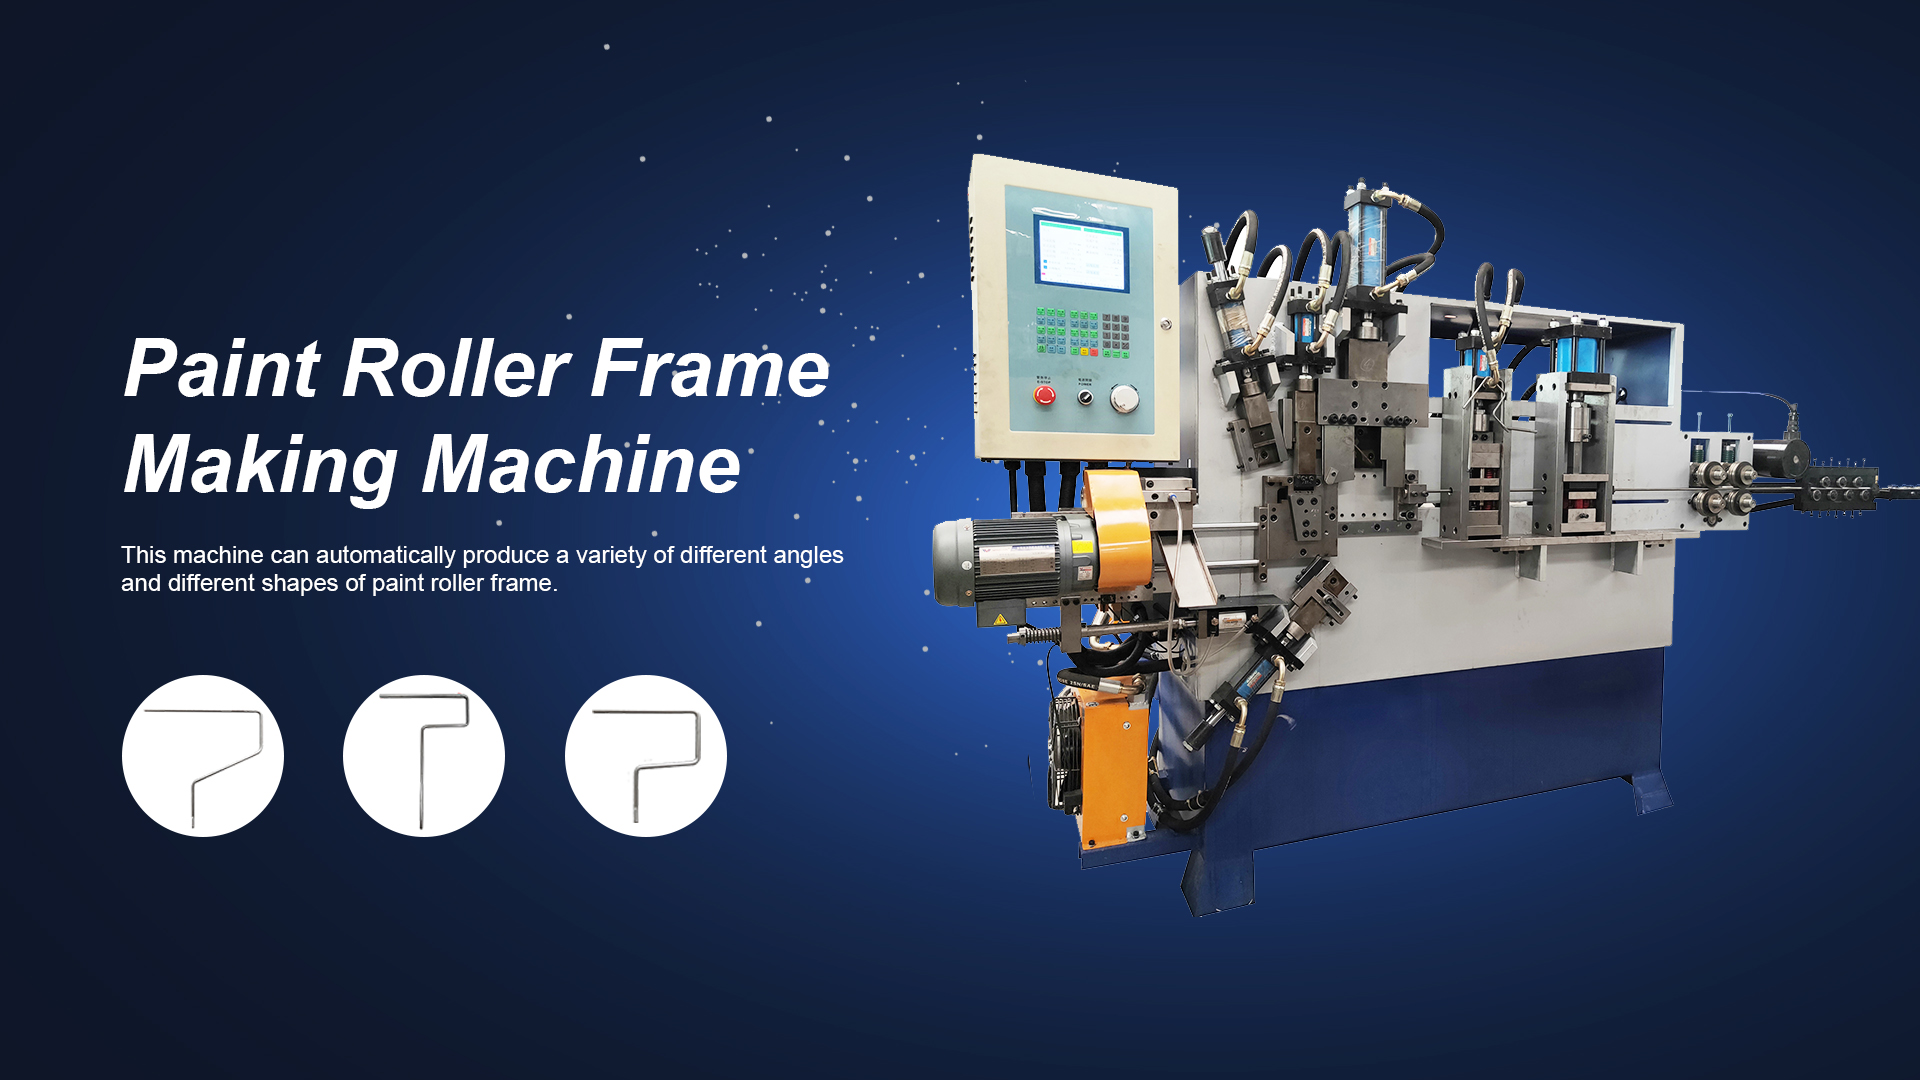 Hydraulic Paint Roller Frame Handle Making Machine